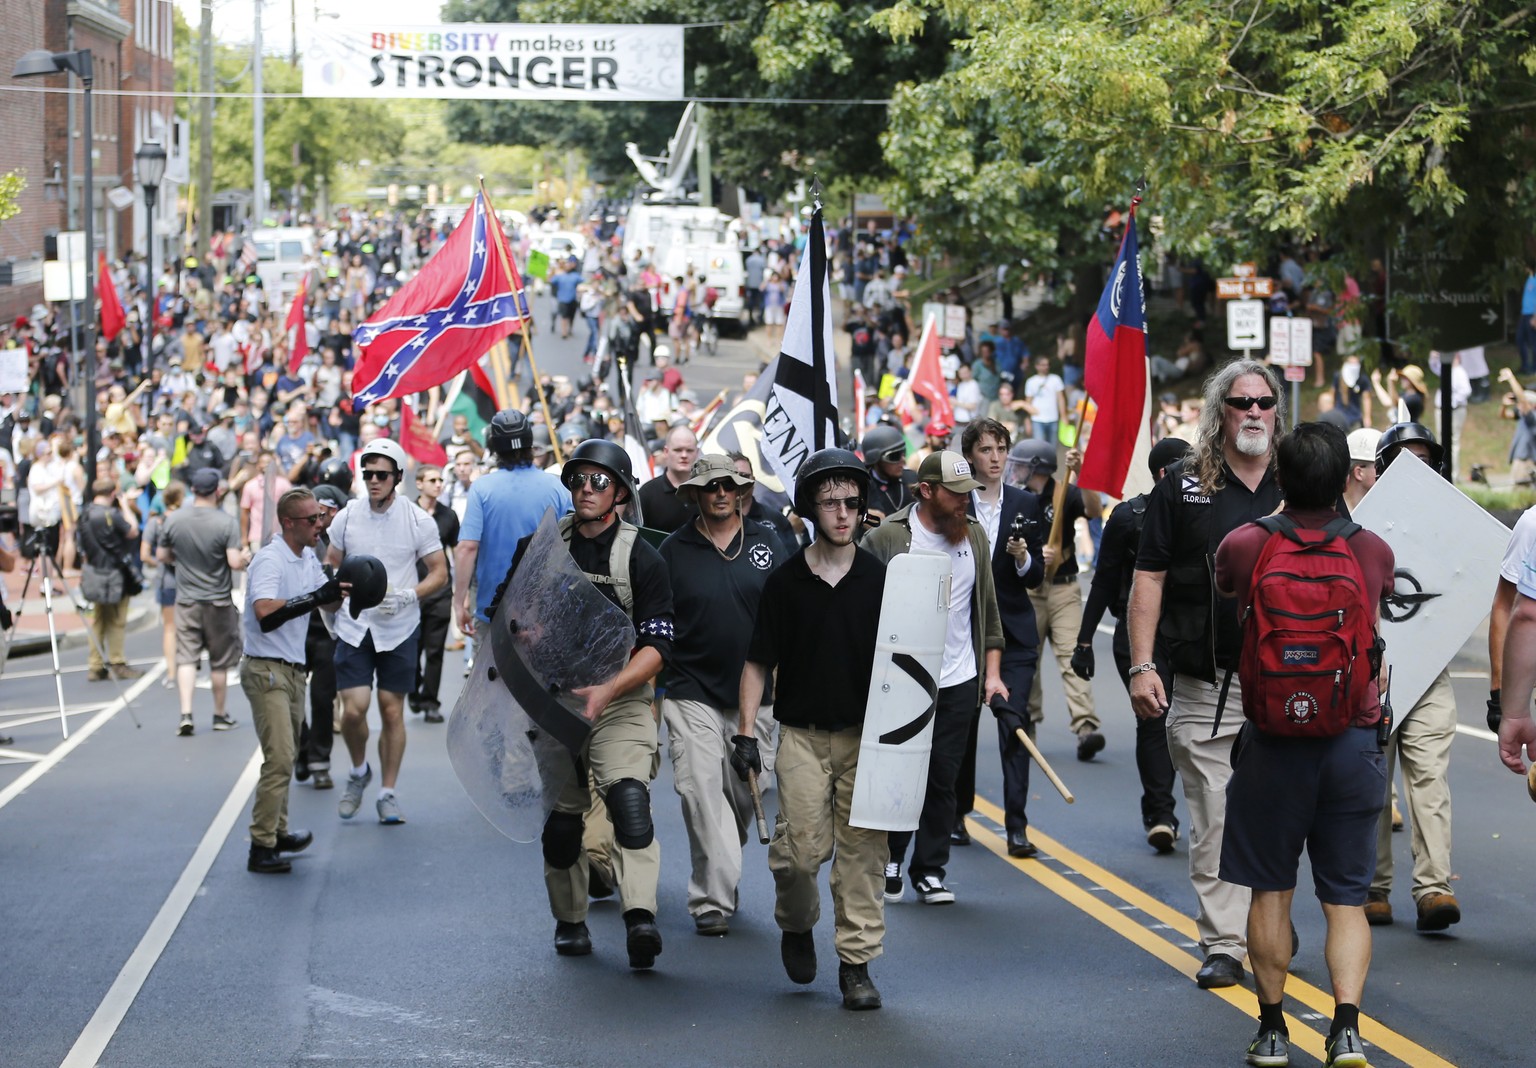 Alt Right demonstrators walk through town after their rally was declared illegal near Lee Park in Charlottesville, Va., Saturday, Aug. 12, 2017. (AP Photo/Steve Helber)